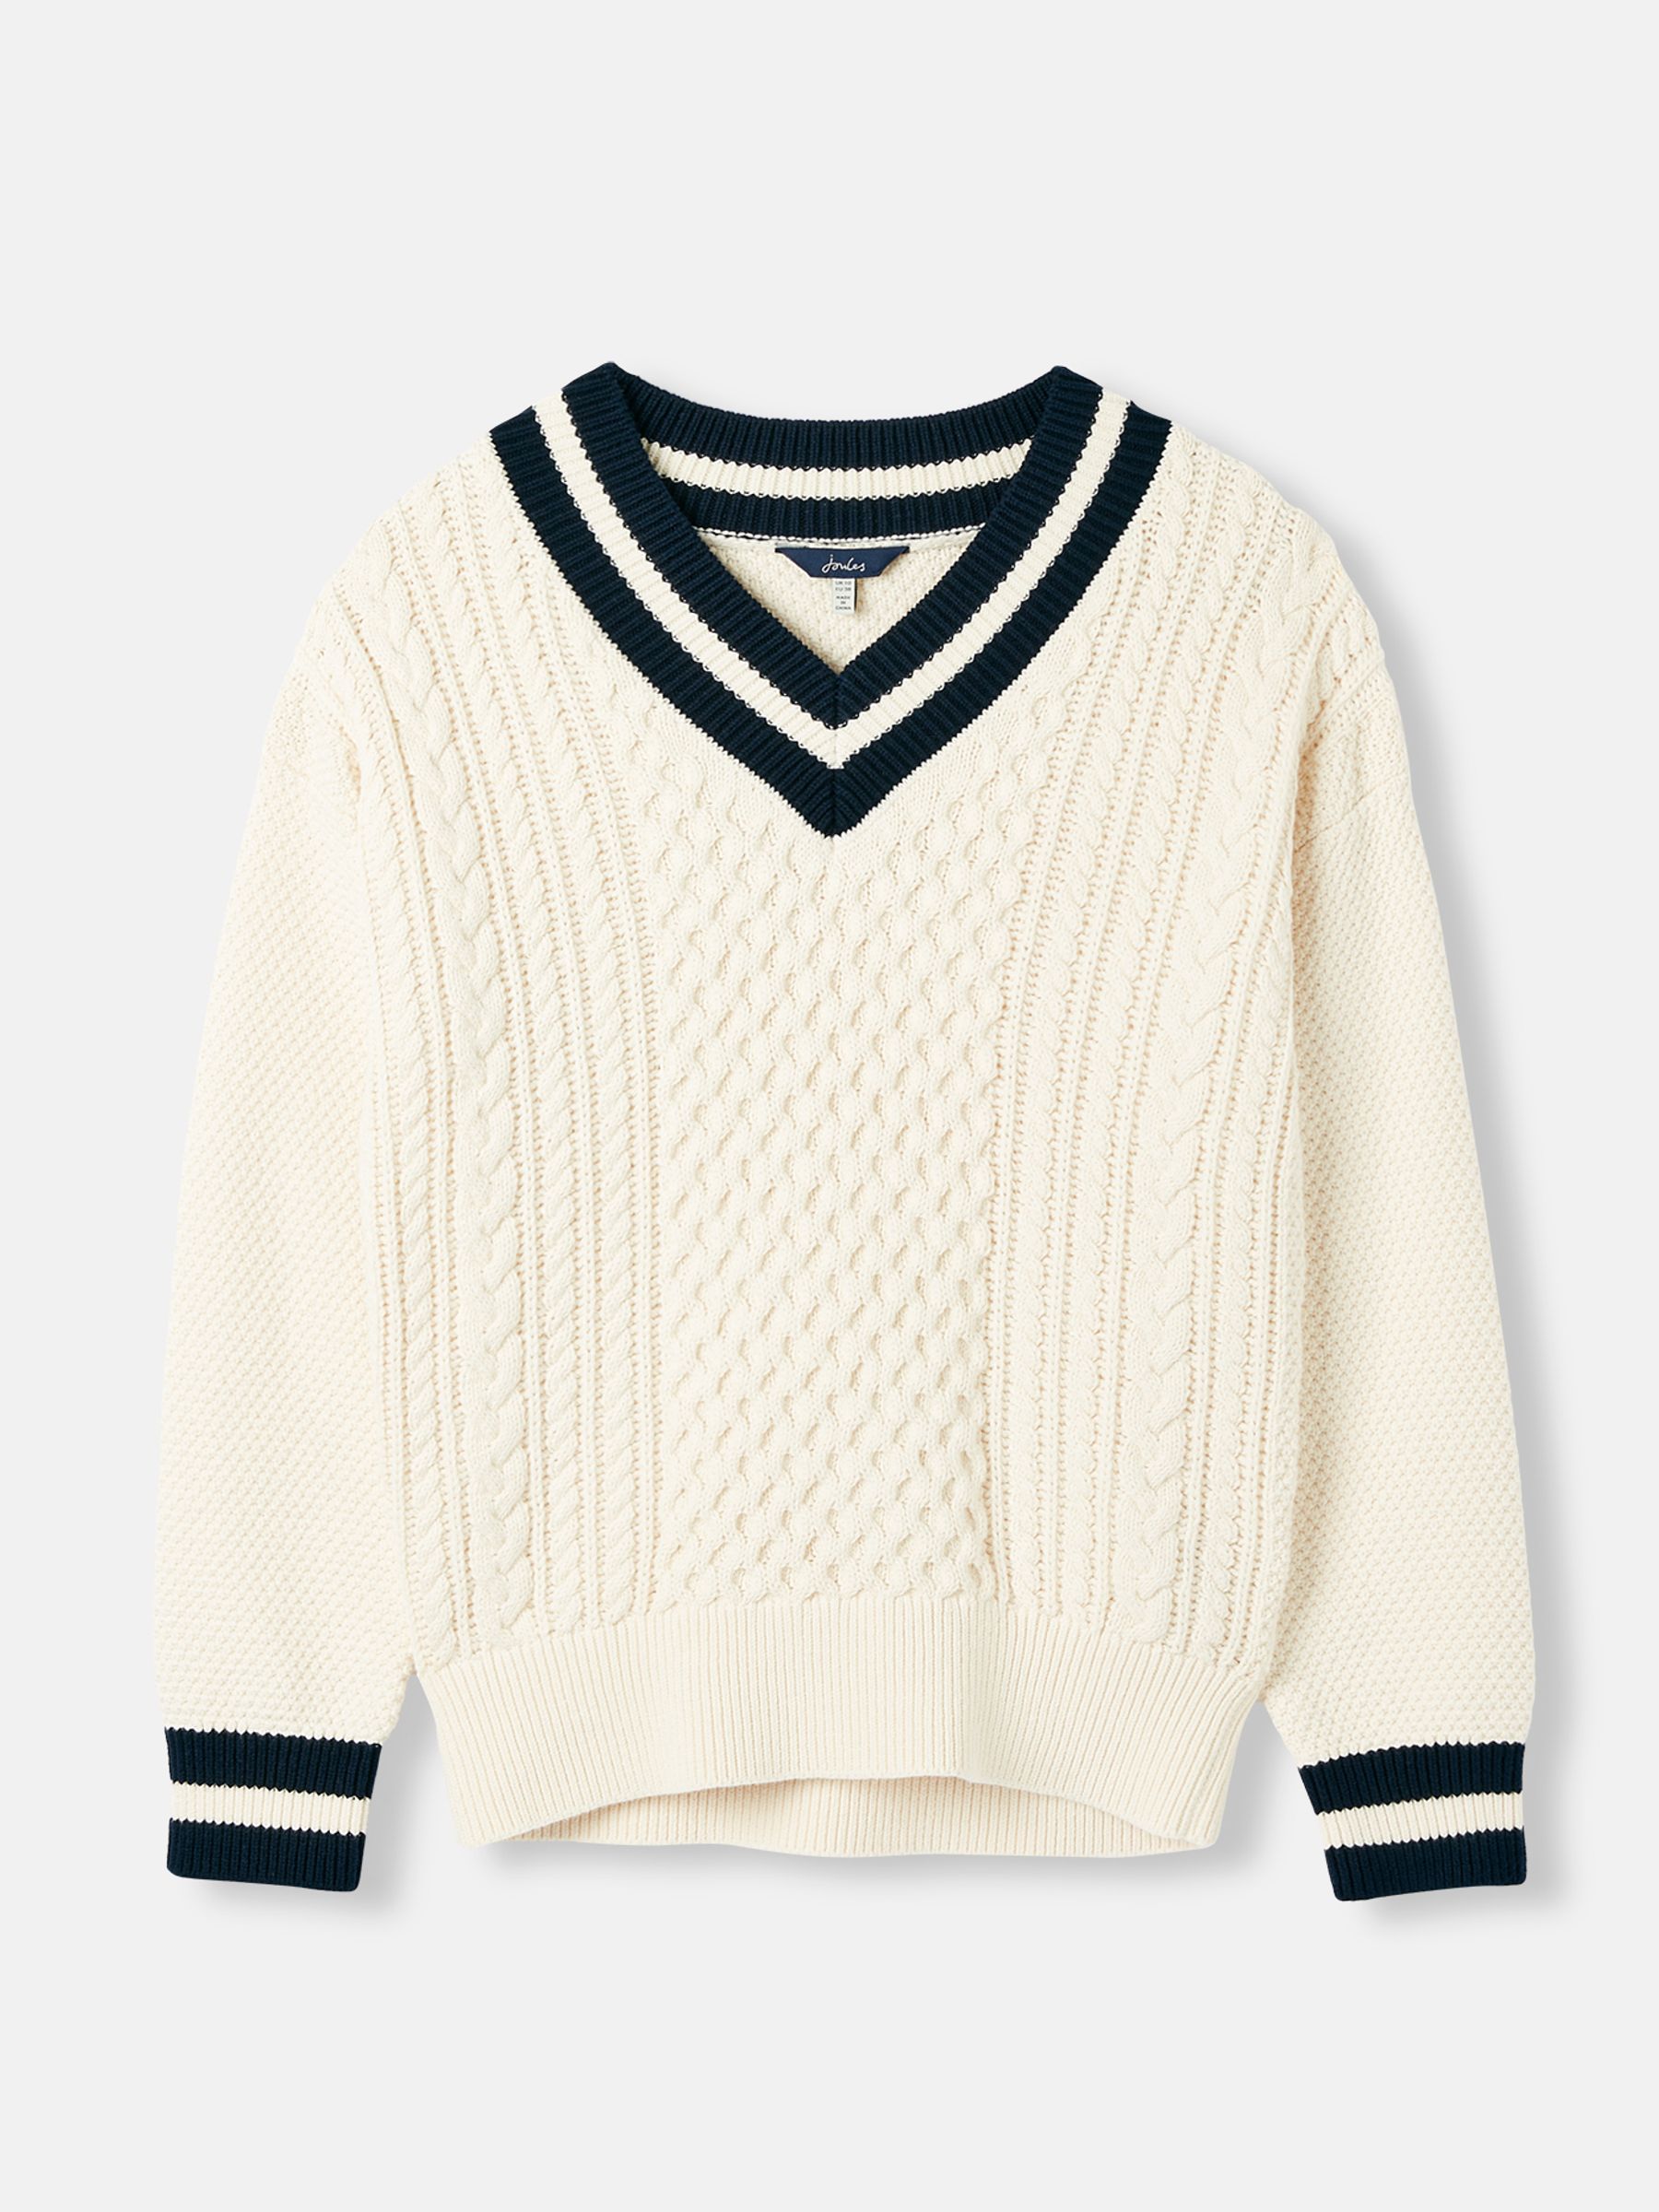 Buy Joules Dawson V-Neck Cricket Jumper from the Joules online shop